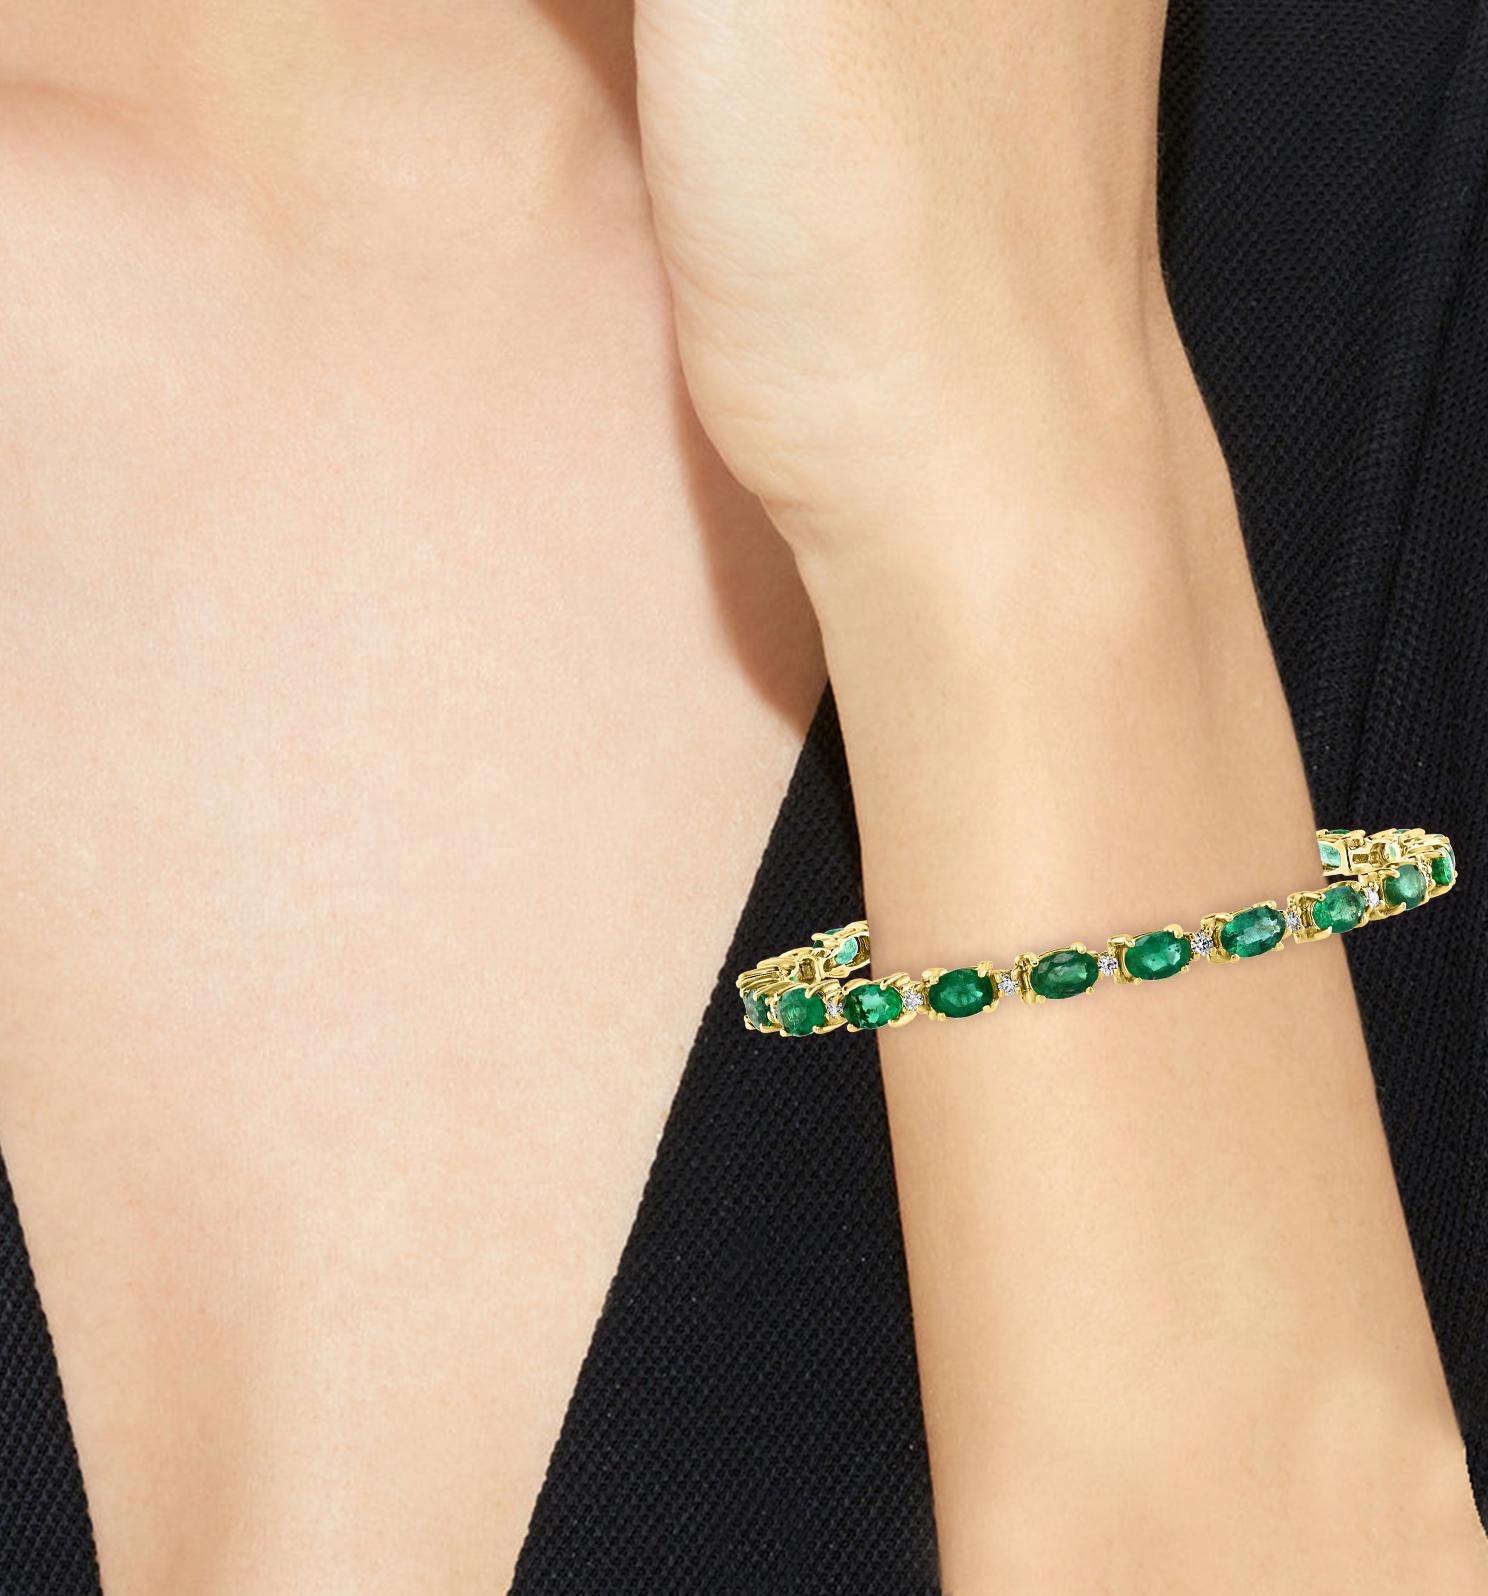  This exceptionally affordable Tennis  bracelet has  21 stones of oval  Emeralds  . Each Emerald is spaced by a tiny diamond  . 
 Total weight of Emerald is approximately  8.0 carat. Size of emerald is 4x6 MM
The bracelet is expertly crafted with